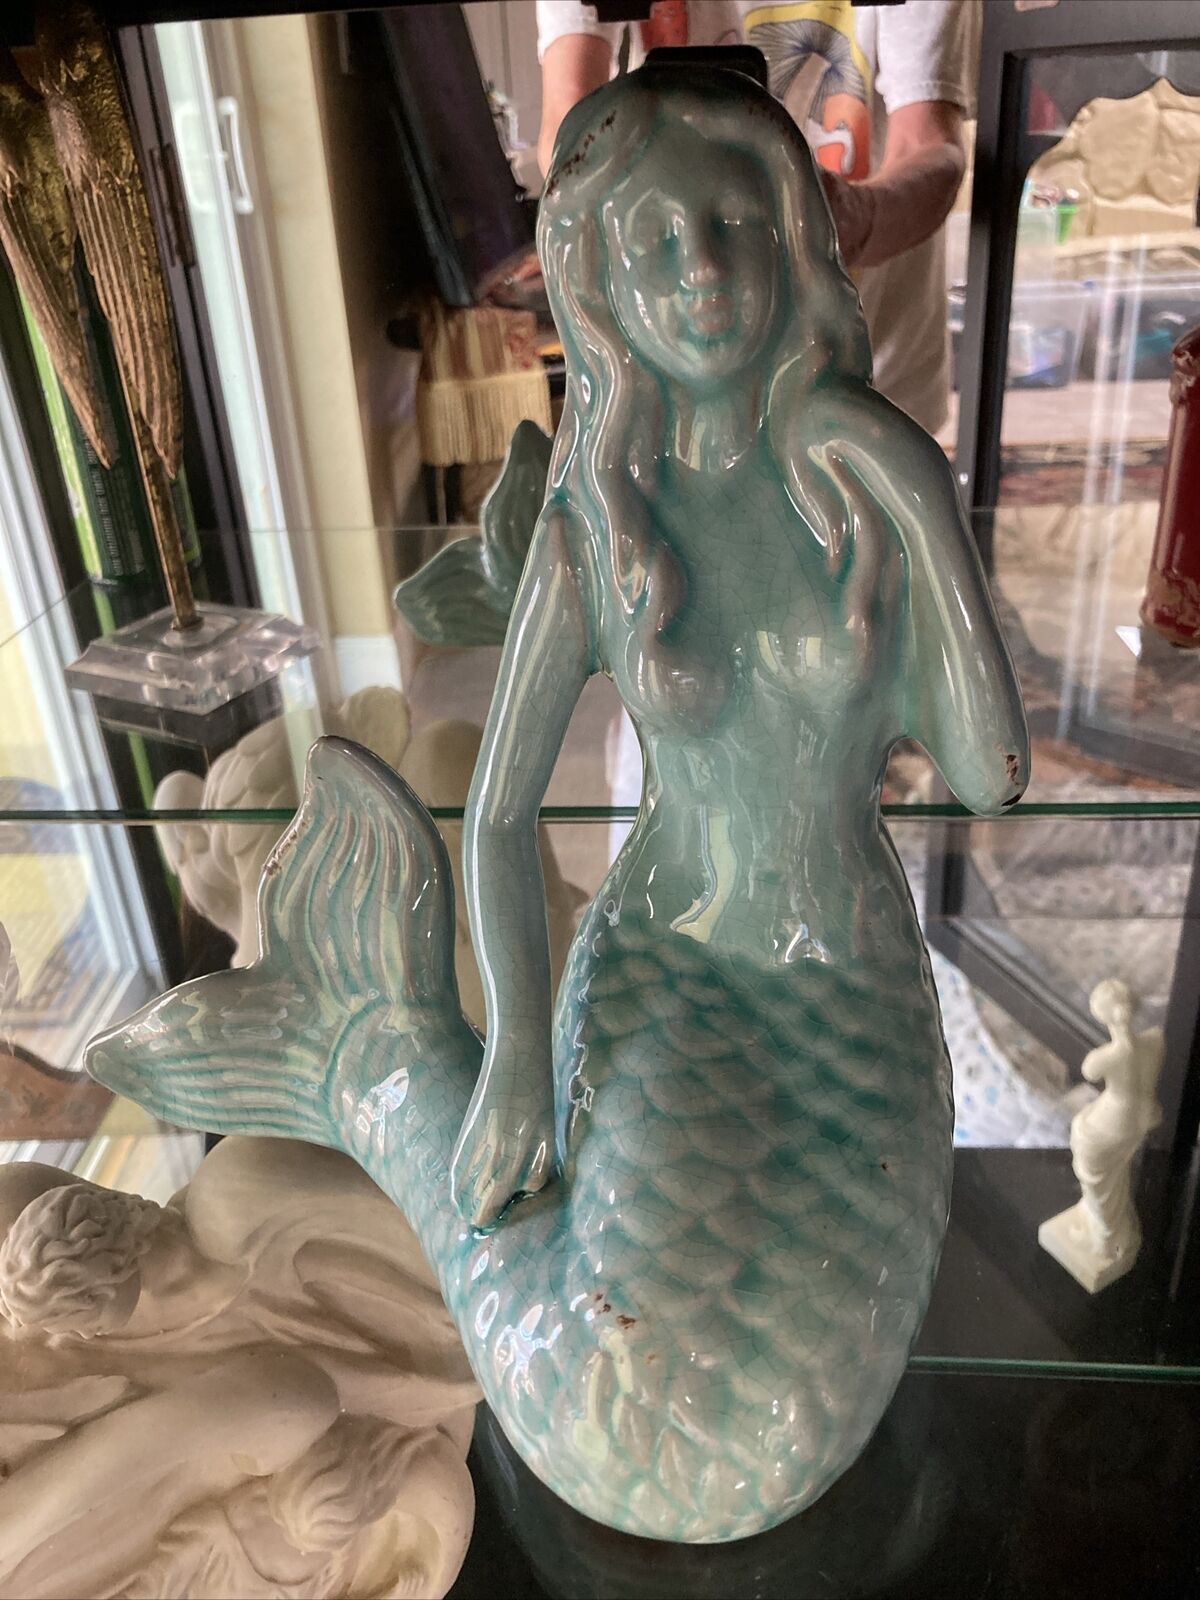 Extremely RARE Ceramic Coastal Beach Mermaid Sculpture SOLD OUT HTF